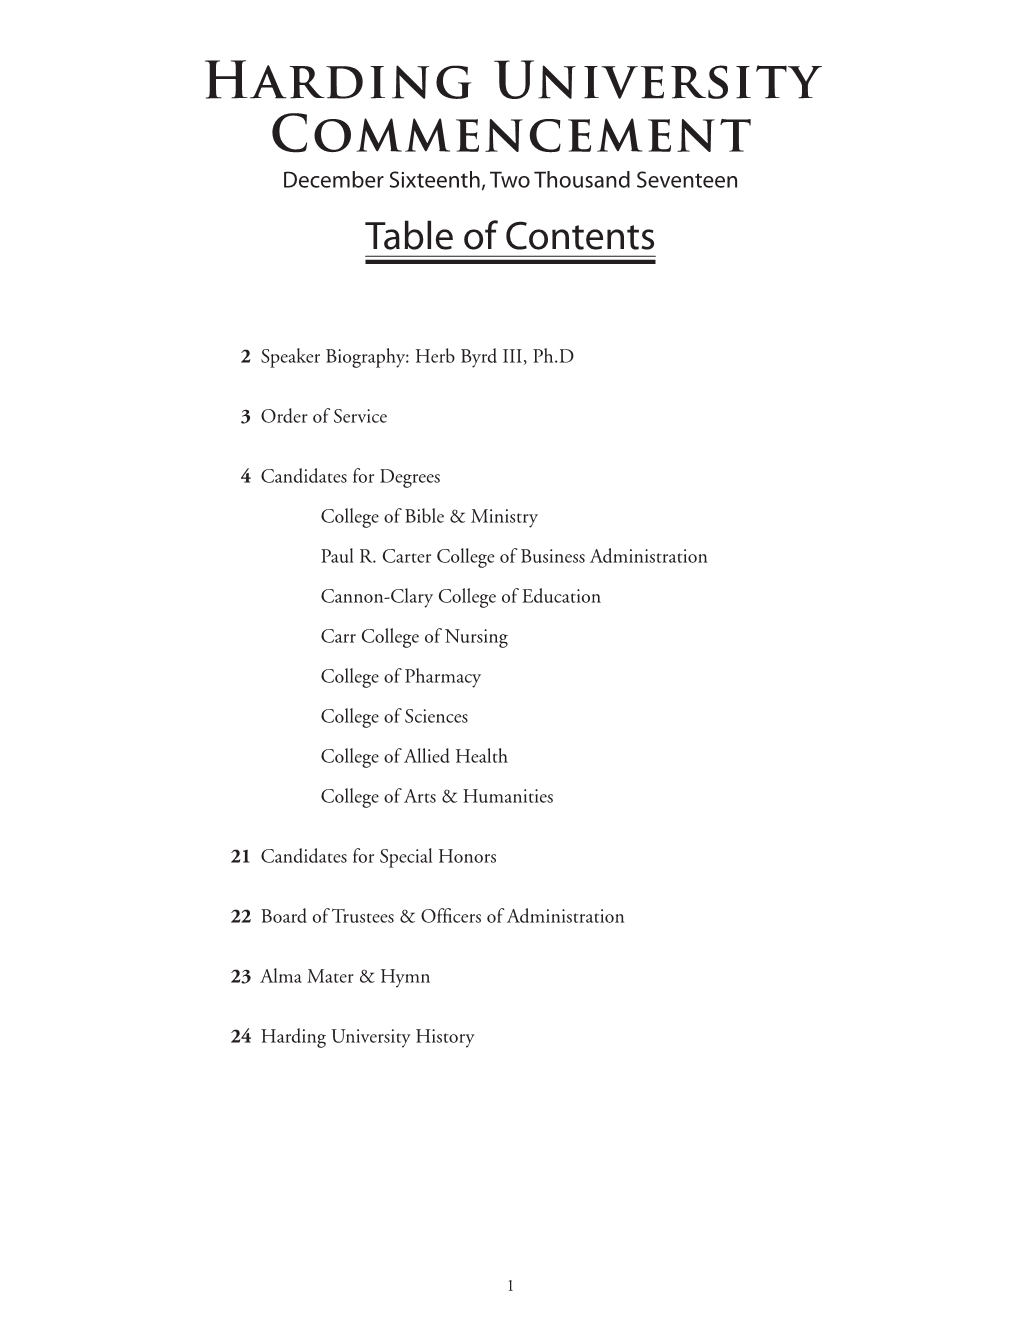 Harding University Commencement December Sixteenth, Two Thousand Seventeen Table of Contents